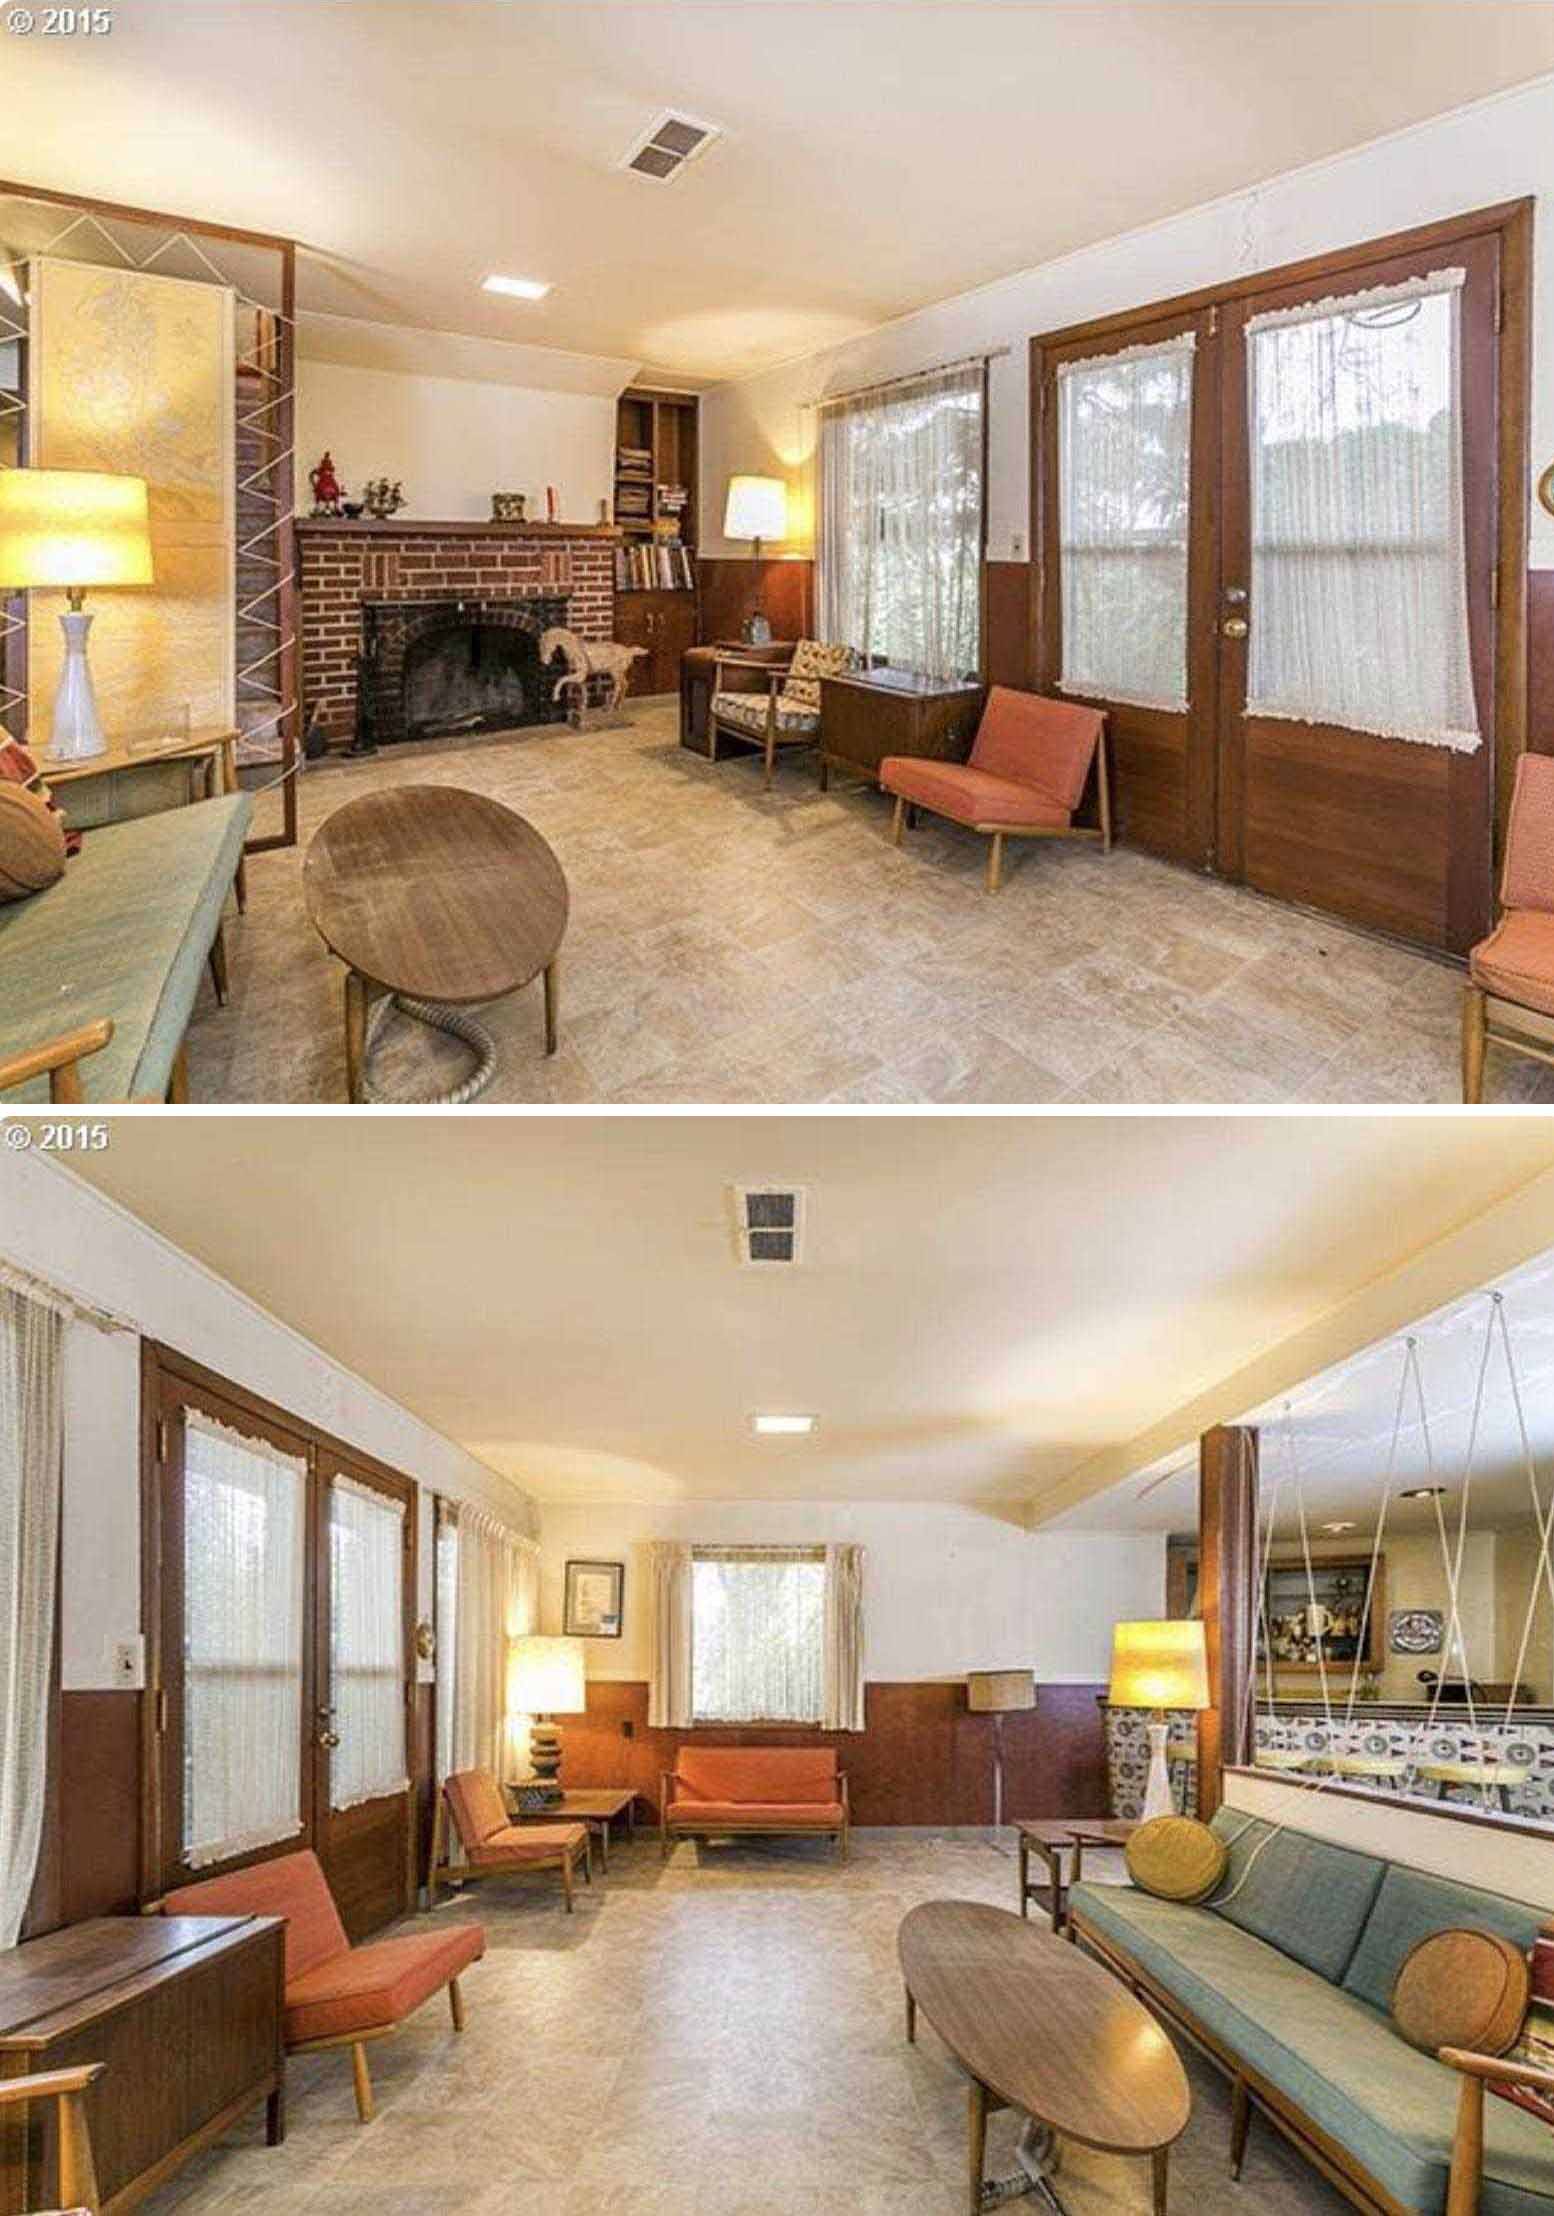 Before - This original family room, located on the lower level of the home, Includes a fireplace with a brick surround, and wood wainscoting on the lower half of the room.